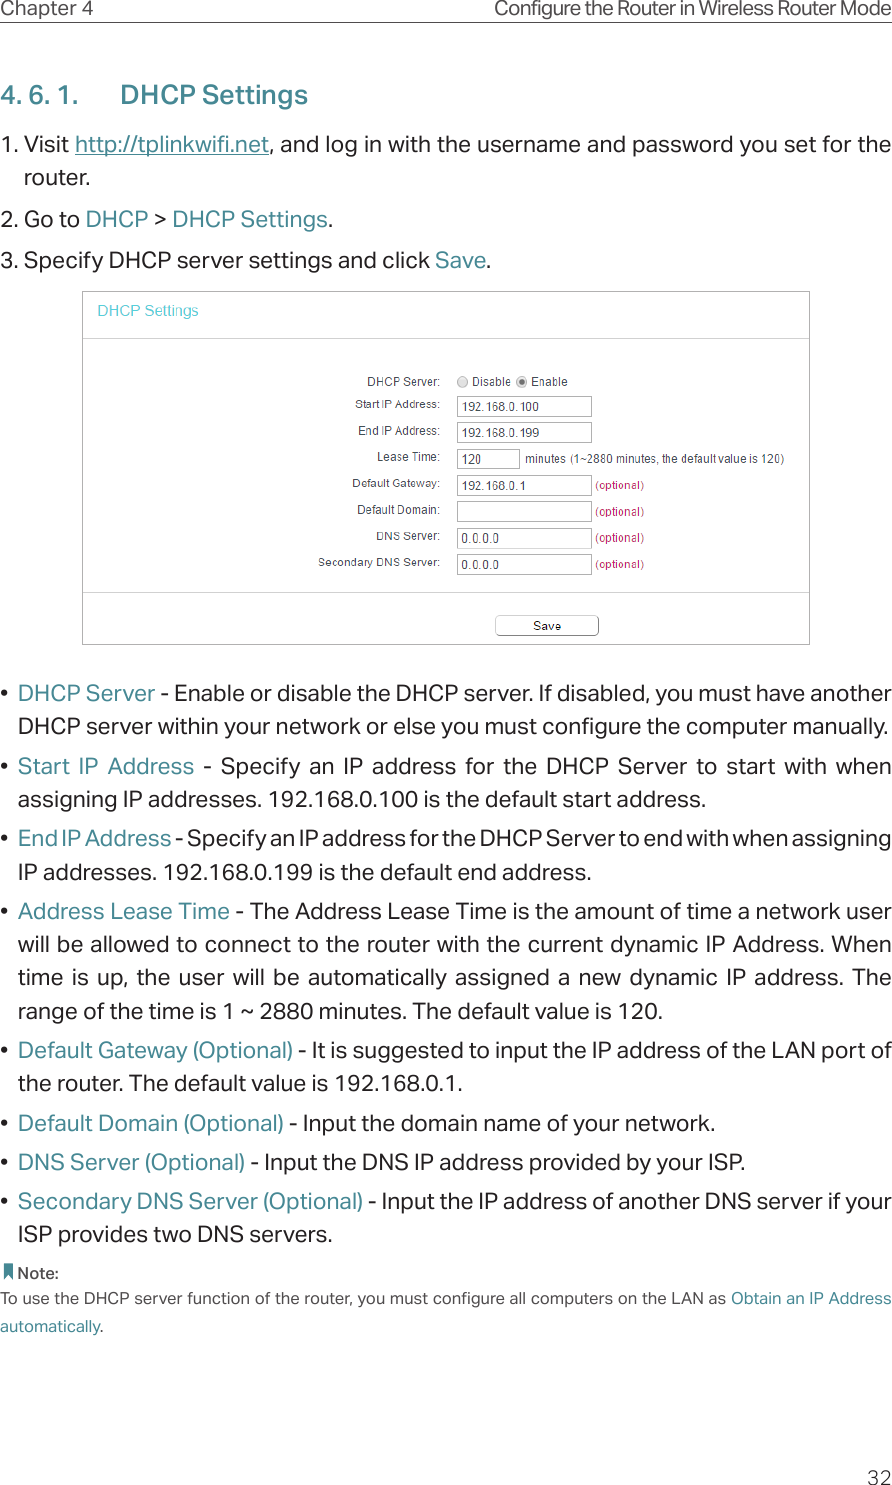 32Chapter 4 Configure the Router in Wireless Router Mode4. 6. 1.  DHCP Settings1. Visit http://tplinkwifi.net, and log in with the username and password you set for the router.2. Go to DHCP &gt; DHCP Settings. 3. Specify DHCP server settings and click Save.•  DHCP Server - Enable or disable the DHCP server. If disabled, you must have another DHCP server within your network or else you must configure the computer manually.•  Start IP Address - Specify an IP address for the DHCP Server to start with when assigning IP addresses. 192.168.0.100 is the default start address.•  End IP Address - Specify an IP address for the DHCP Server to end with when assigning IP addresses. 192.168.0.199 is the default end address.•  Address Lease Time - The Address Lease Time is the amount of time a network user will be allowed to connect to the router with the current dynamic IP Address. When time is up, the user will be automatically assigned a new dynamic IP address. The range of the time is 1 ~ 2880 minutes. The default value is 120.•  Default Gateway (Optional) - It is suggested to input the IP address of the LAN port of the router. The default value is 192.168.0.1.•  Default Domain (Optional) - Input the domain name of your network.•  DNS Server (Optional) - Input the DNS IP address provided by your ISP.•  Secondary DNS Server (Optional) - Input the IP address of another DNS server if your ISP provides two DNS servers. Note:To use the DHCP server function of the router, you must configure all computers on the LAN as Obtain an IP Address automatically.